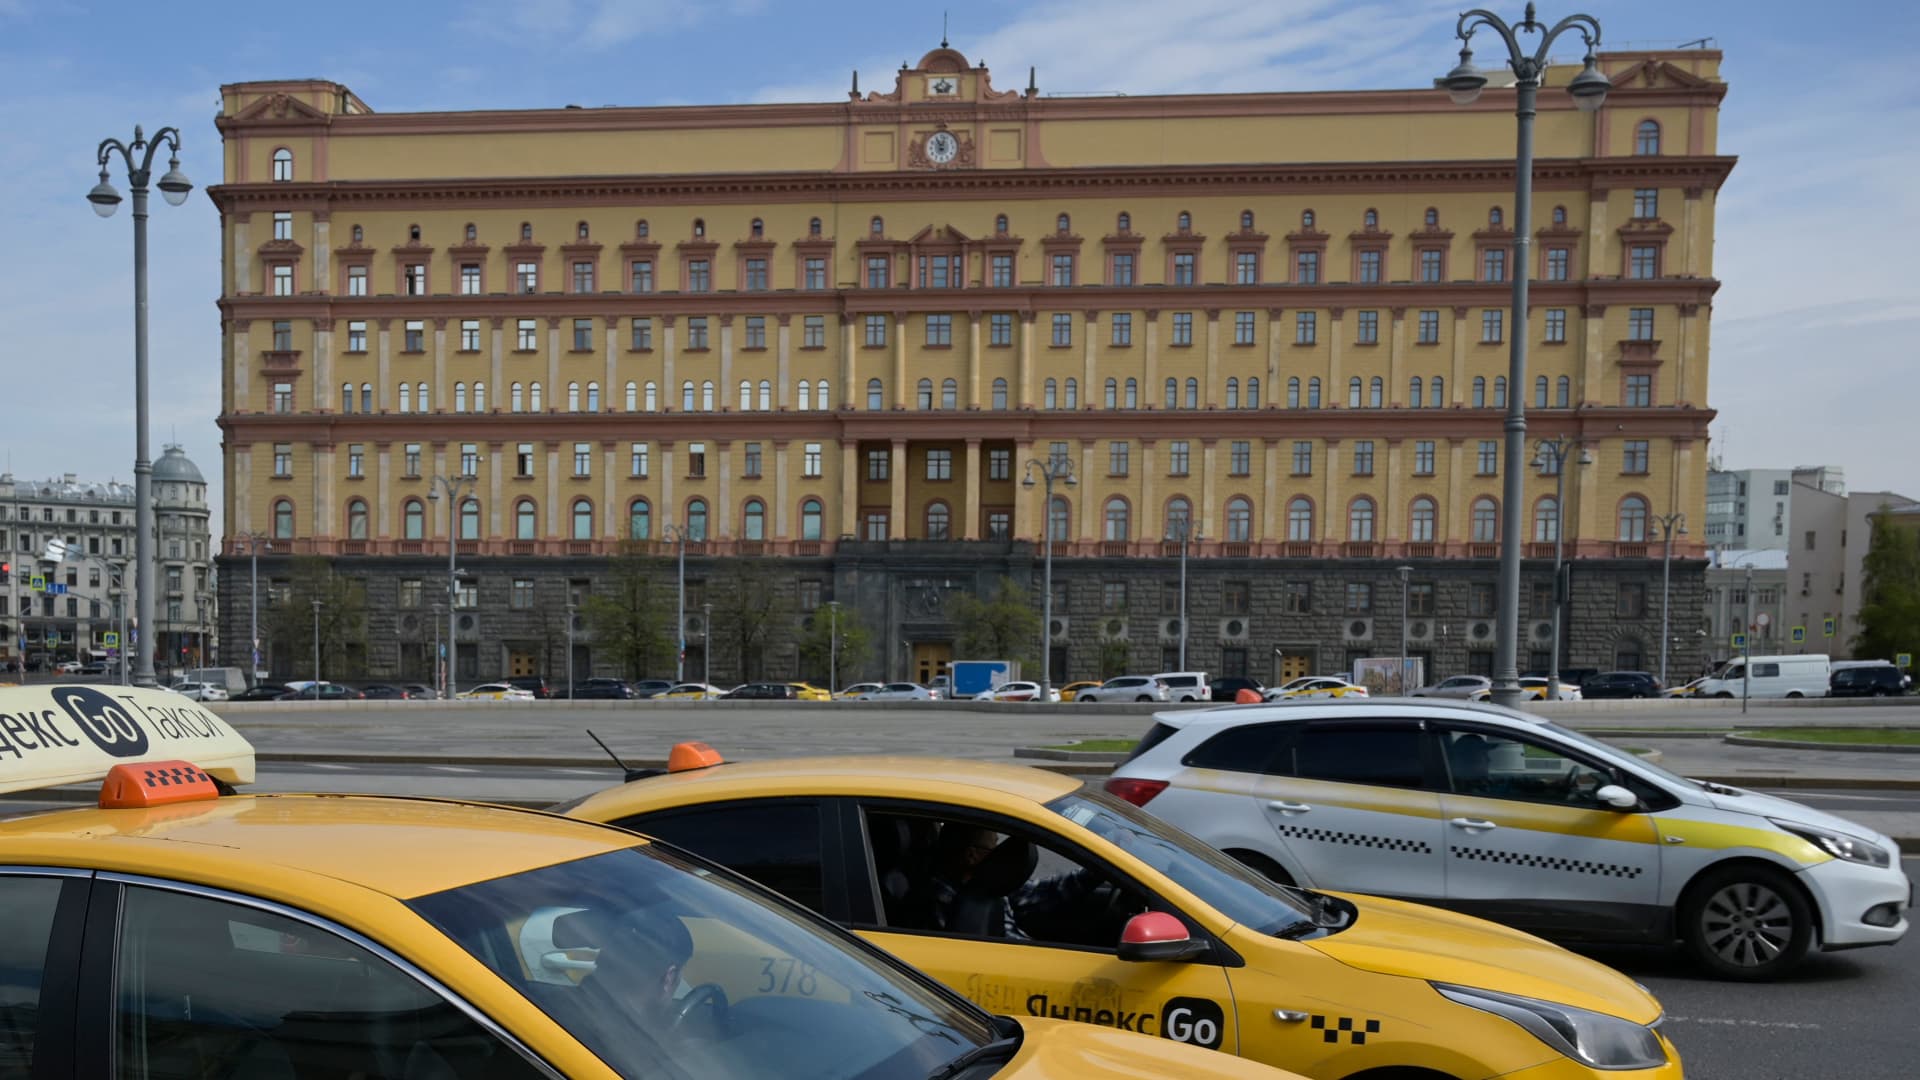 Taxis move past the headquarters of Russia's Federal Security Service, known as the FSB, in central Moscow, May 12, 2022.